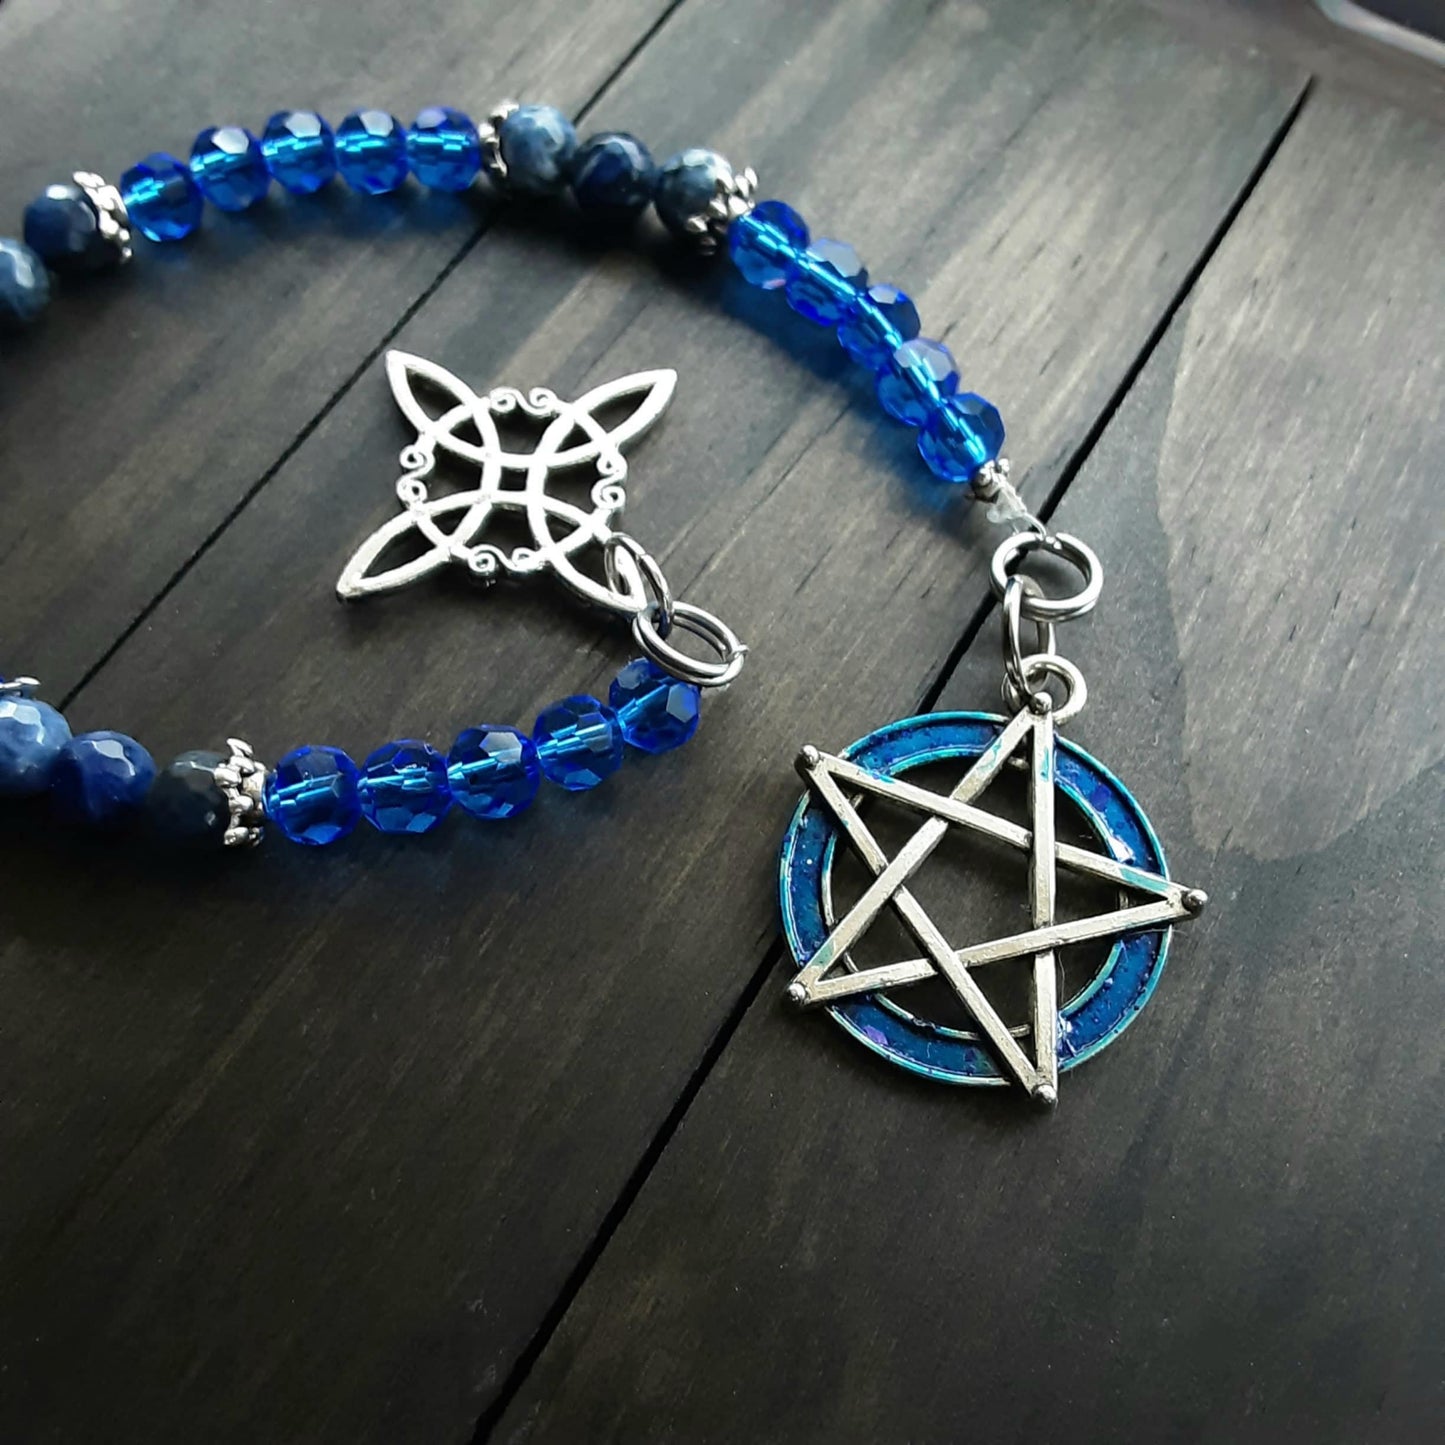 Pagan prayer beads with blue crystals Sodalite gemstone Pentacle and Witch knot protection amulet Altar tools - please read